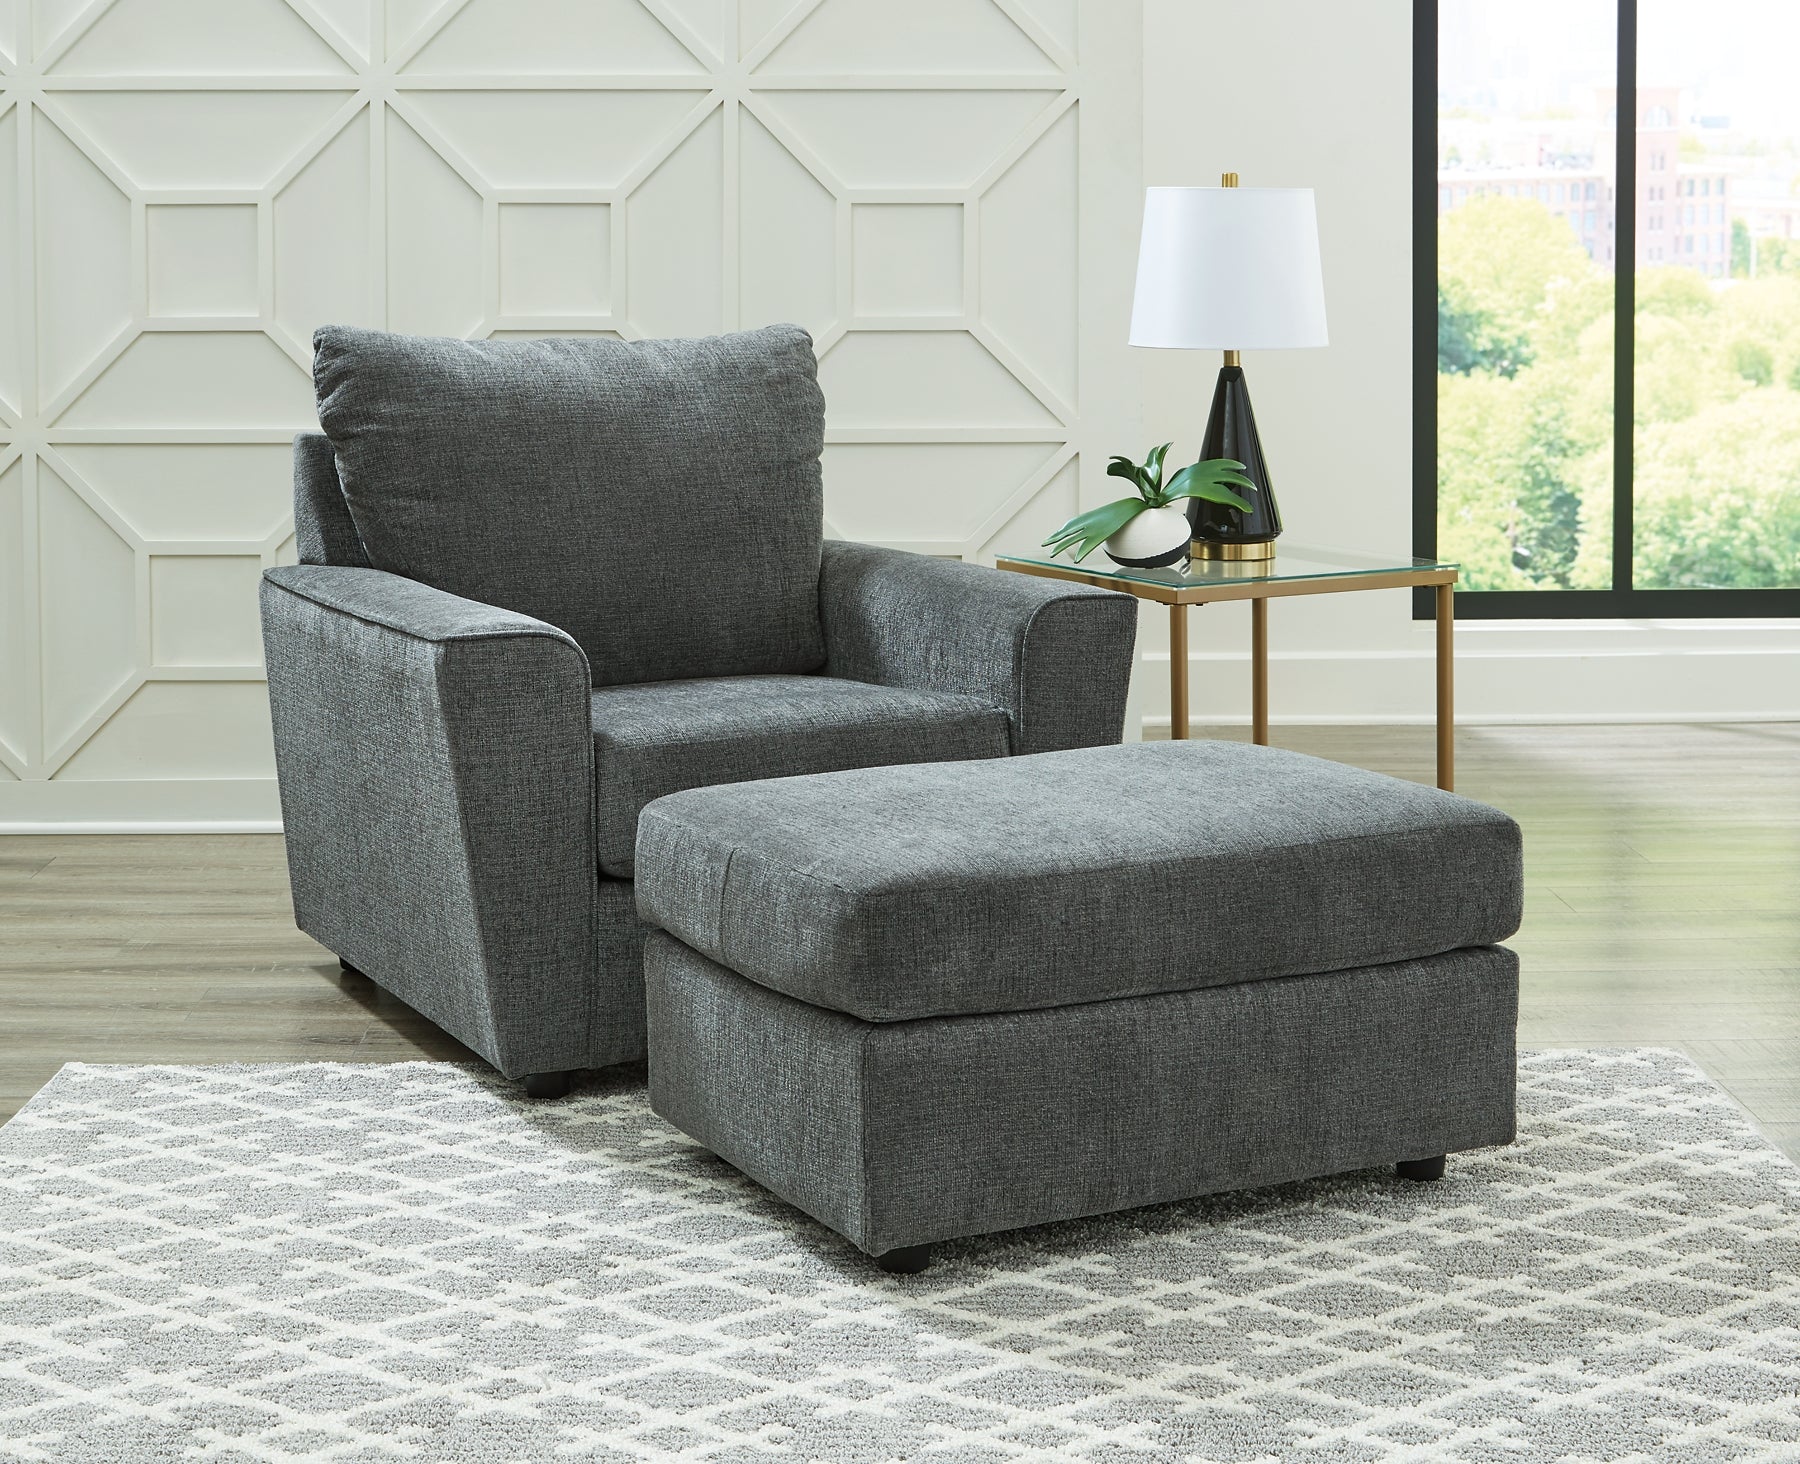 Stairatt Sofa, Loveseat, Chair and Ottoman Signature Design by Ashley®